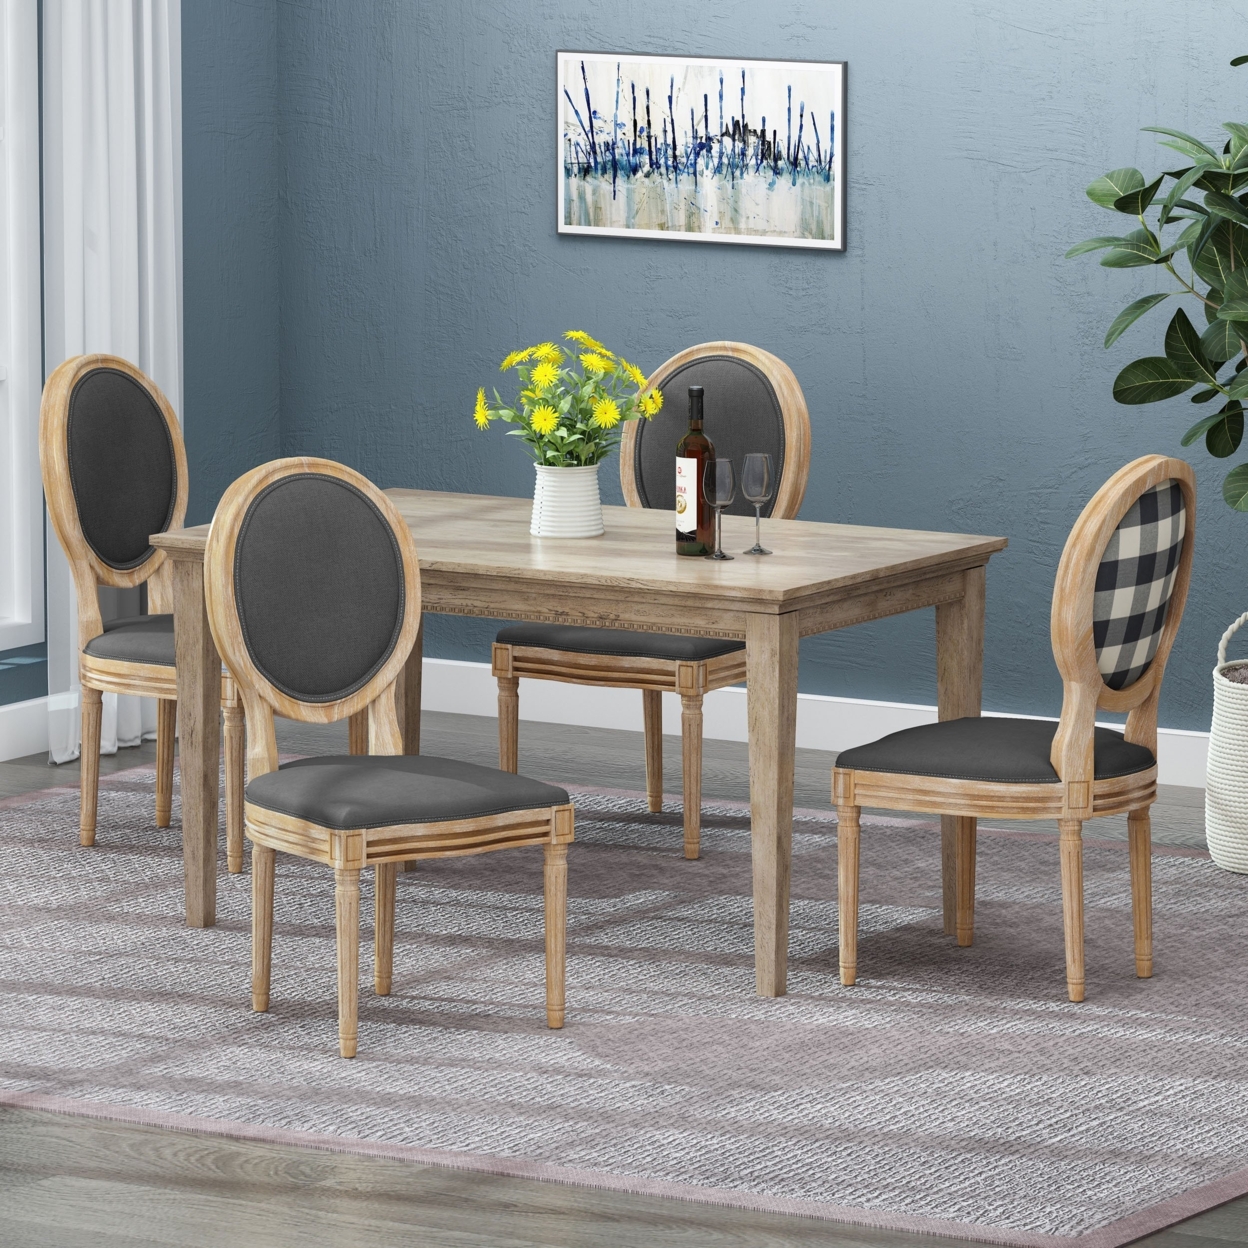 Lariya French Country Dining Chairs (Set Of 4) - Light Gray/natural